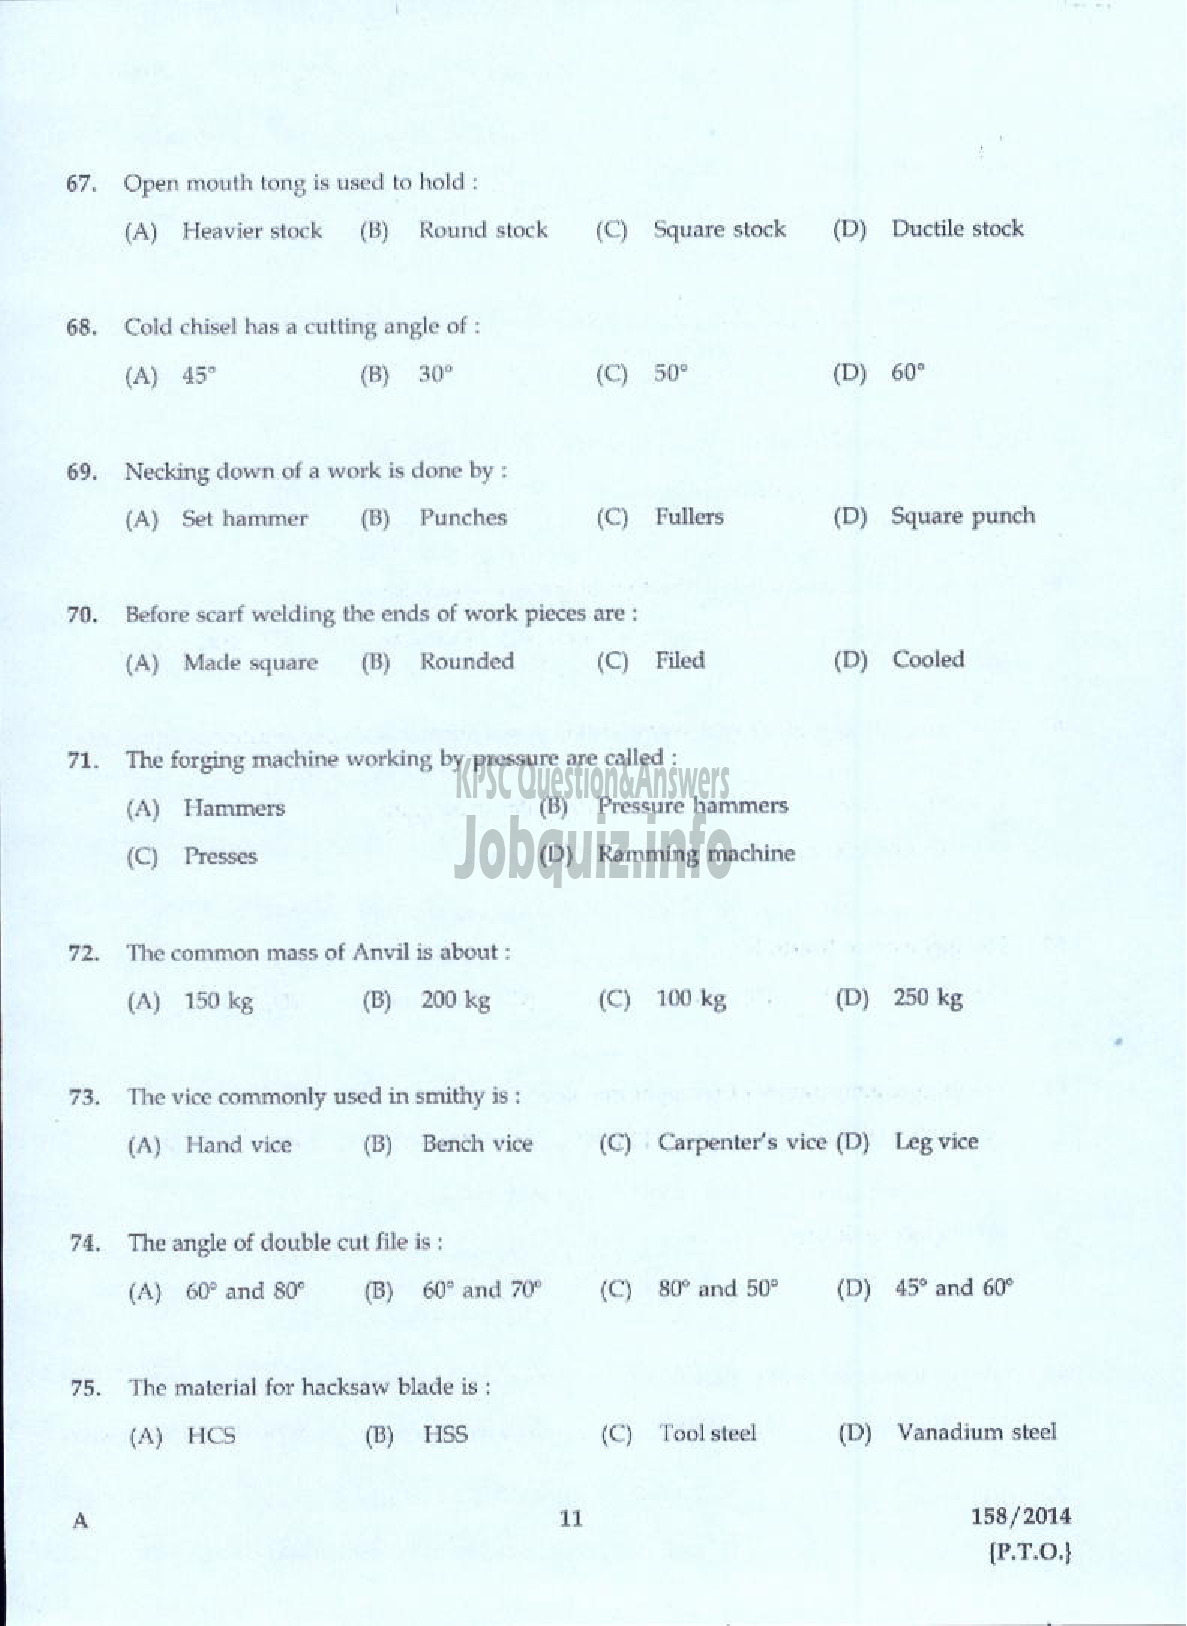 Kerala PSC Question Paper - TRADESMAN SMITHY FORGING AND HEAT TREATING TECHNICAL EDUCATION KTM AND KKD-9